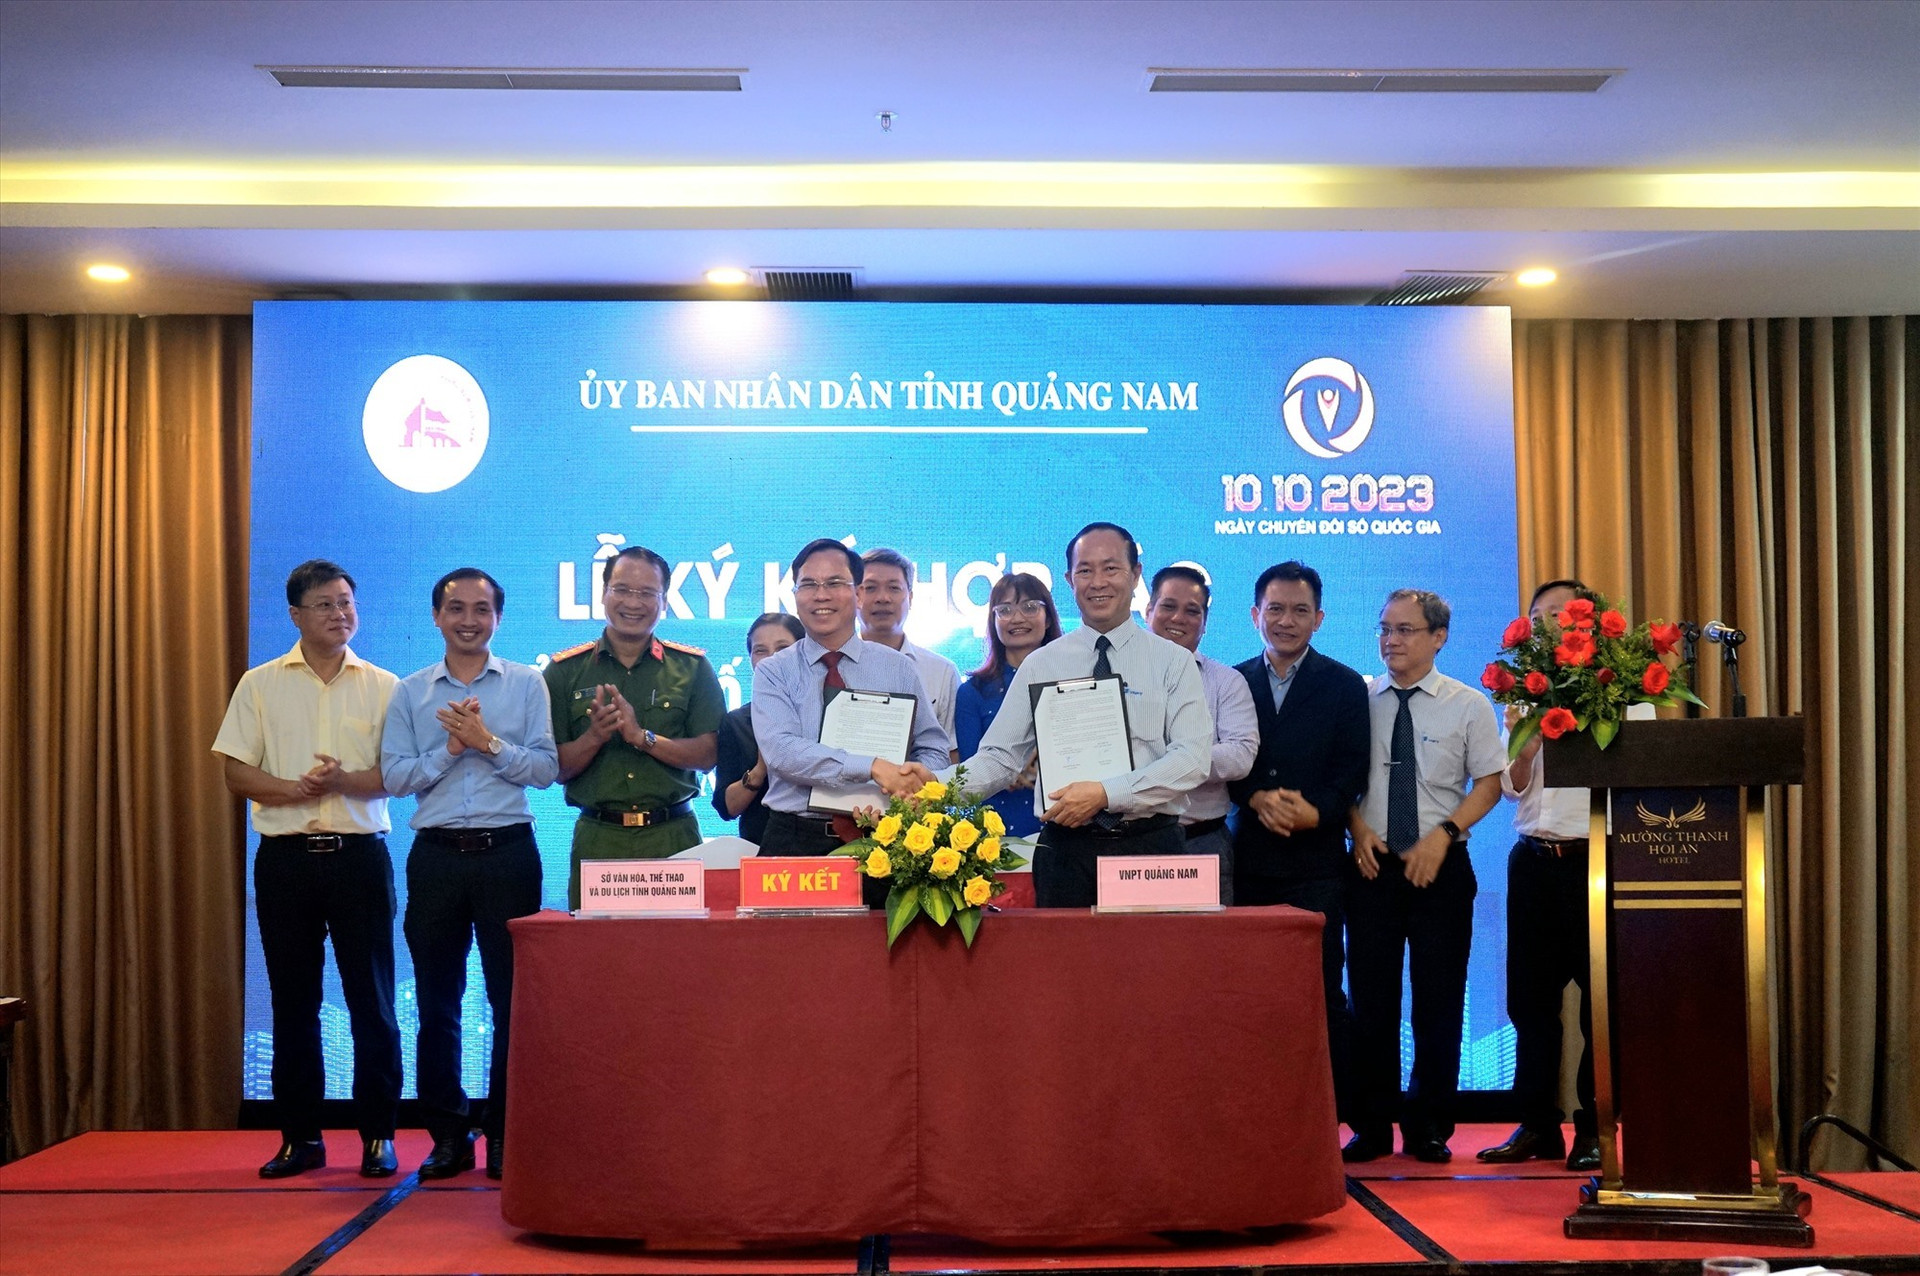 Signing ceremony of the cooperation agreement on smart tourism development between Quang Nam authorities and VNPT Quang Nam.